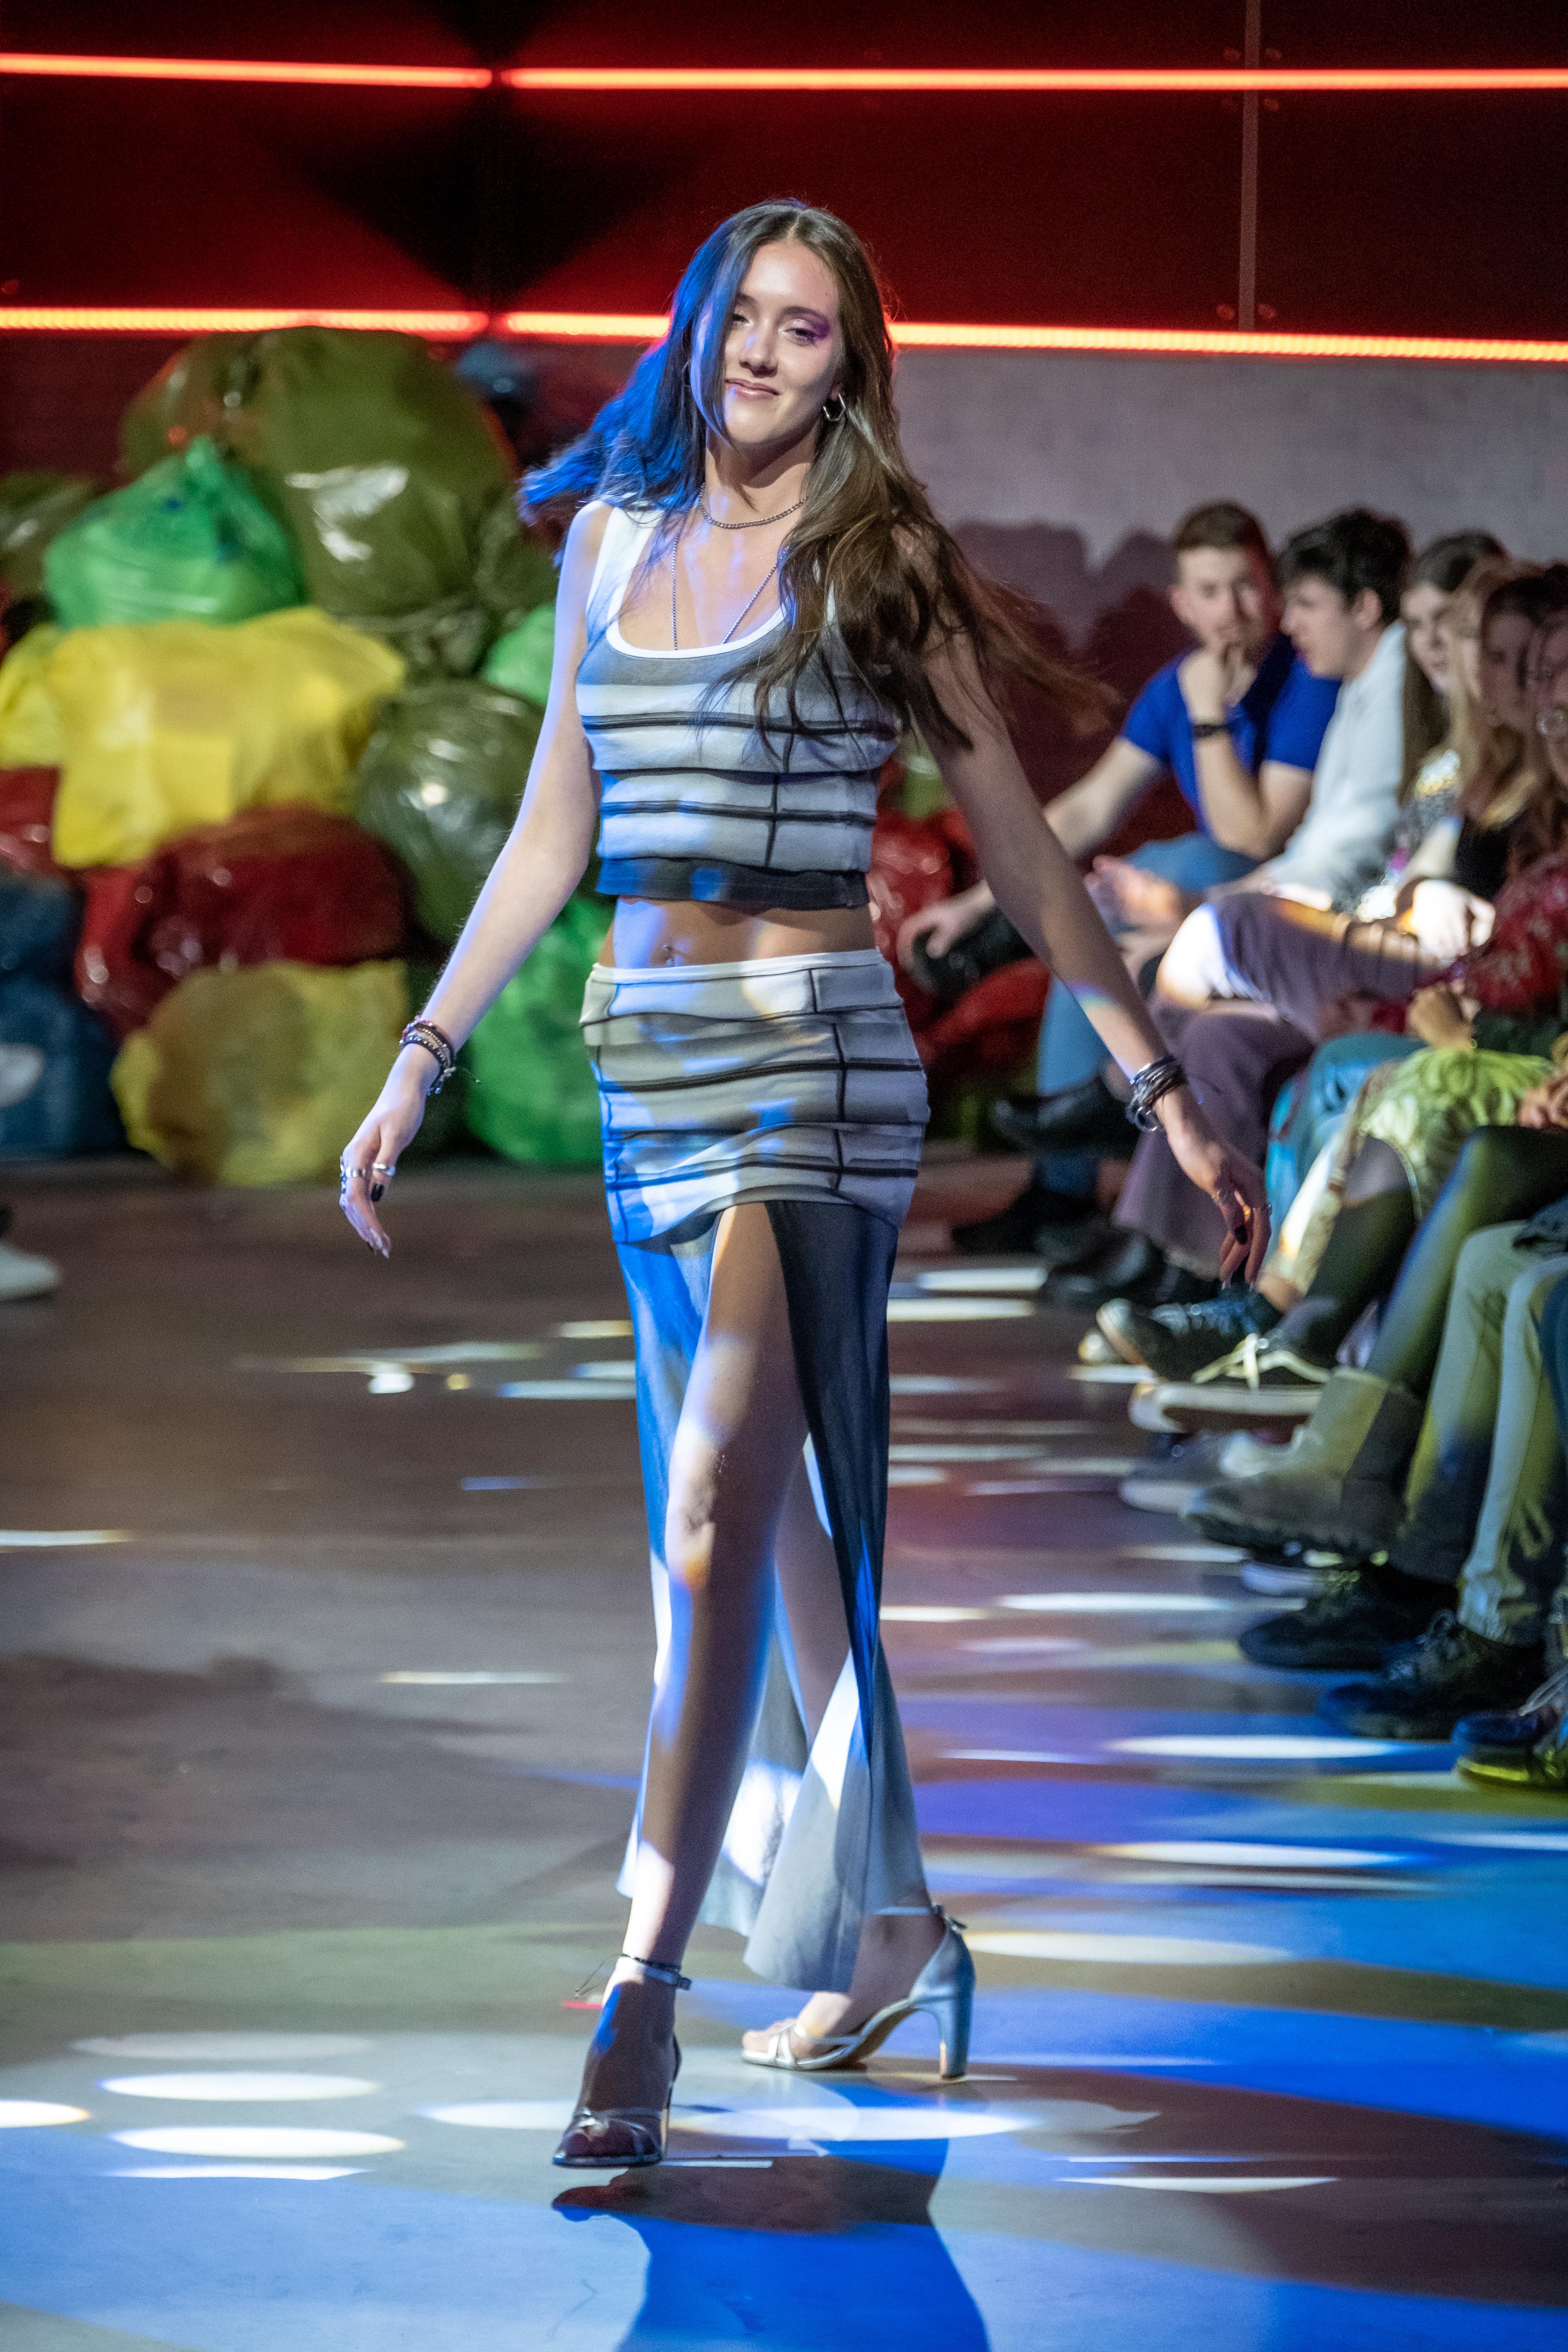 Model wears grey and white striped outfit on the runway